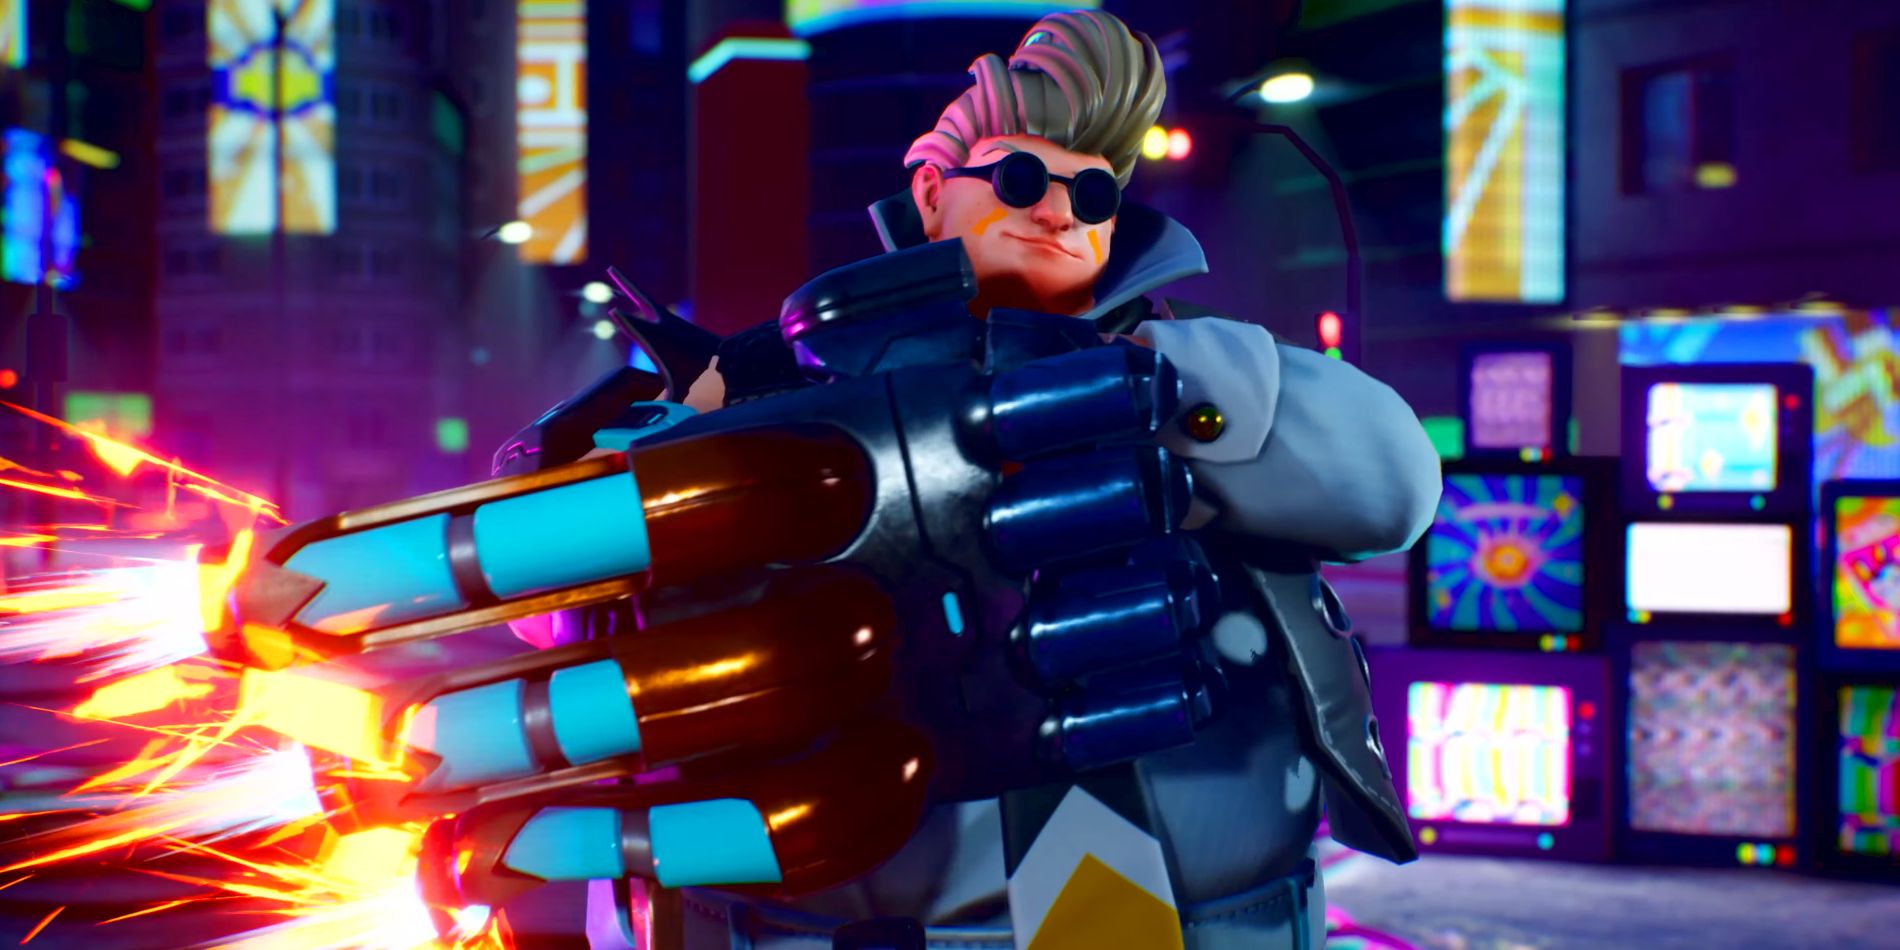 Rhythm fighter God of Rock character Johann posing in the middle of the screen with his large robotic fist currently shooting out flames, black sunglasses, and puffy brown hair with a futuristic city behind him.